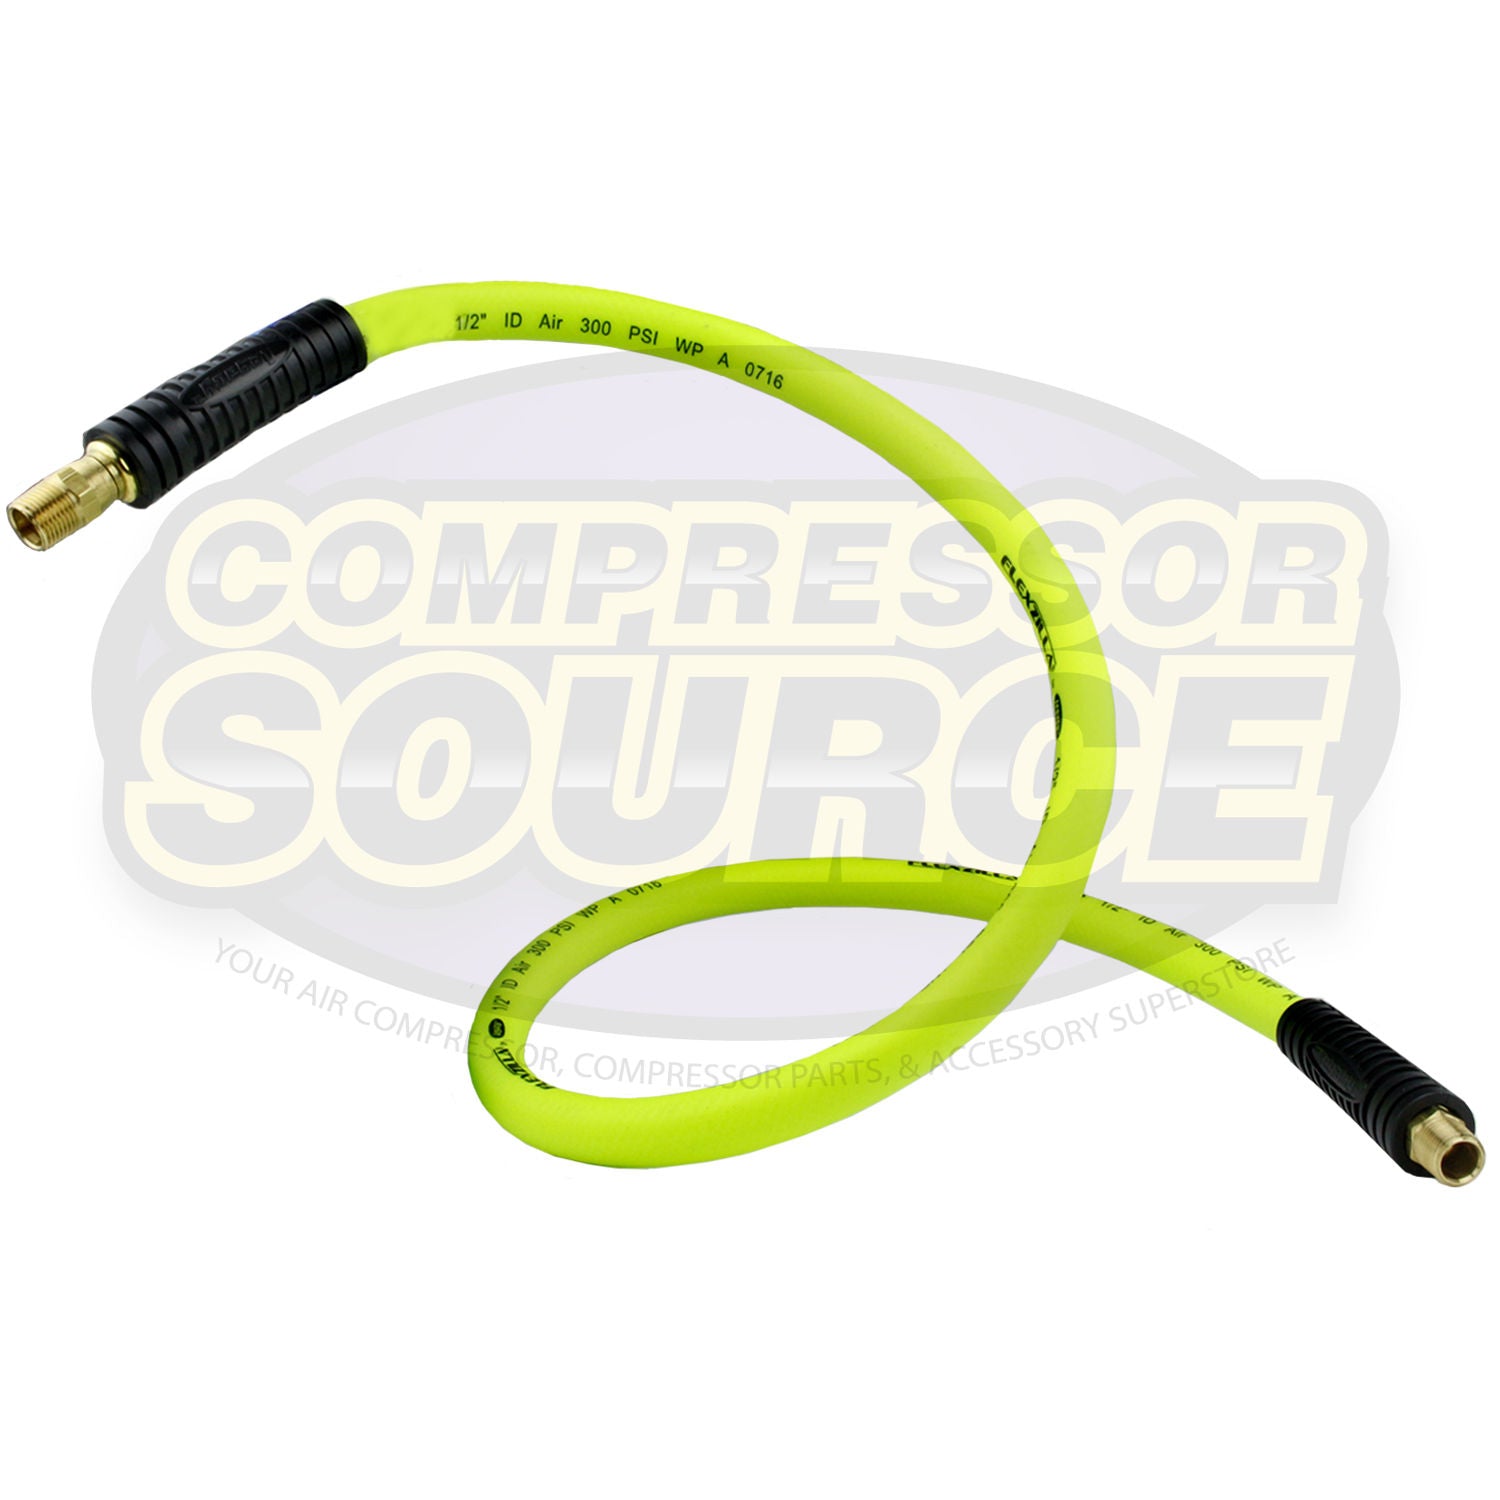 New Flexzilla 1/2 x 4' FT Air Hose Whip With 3/8' MNPT Swivel